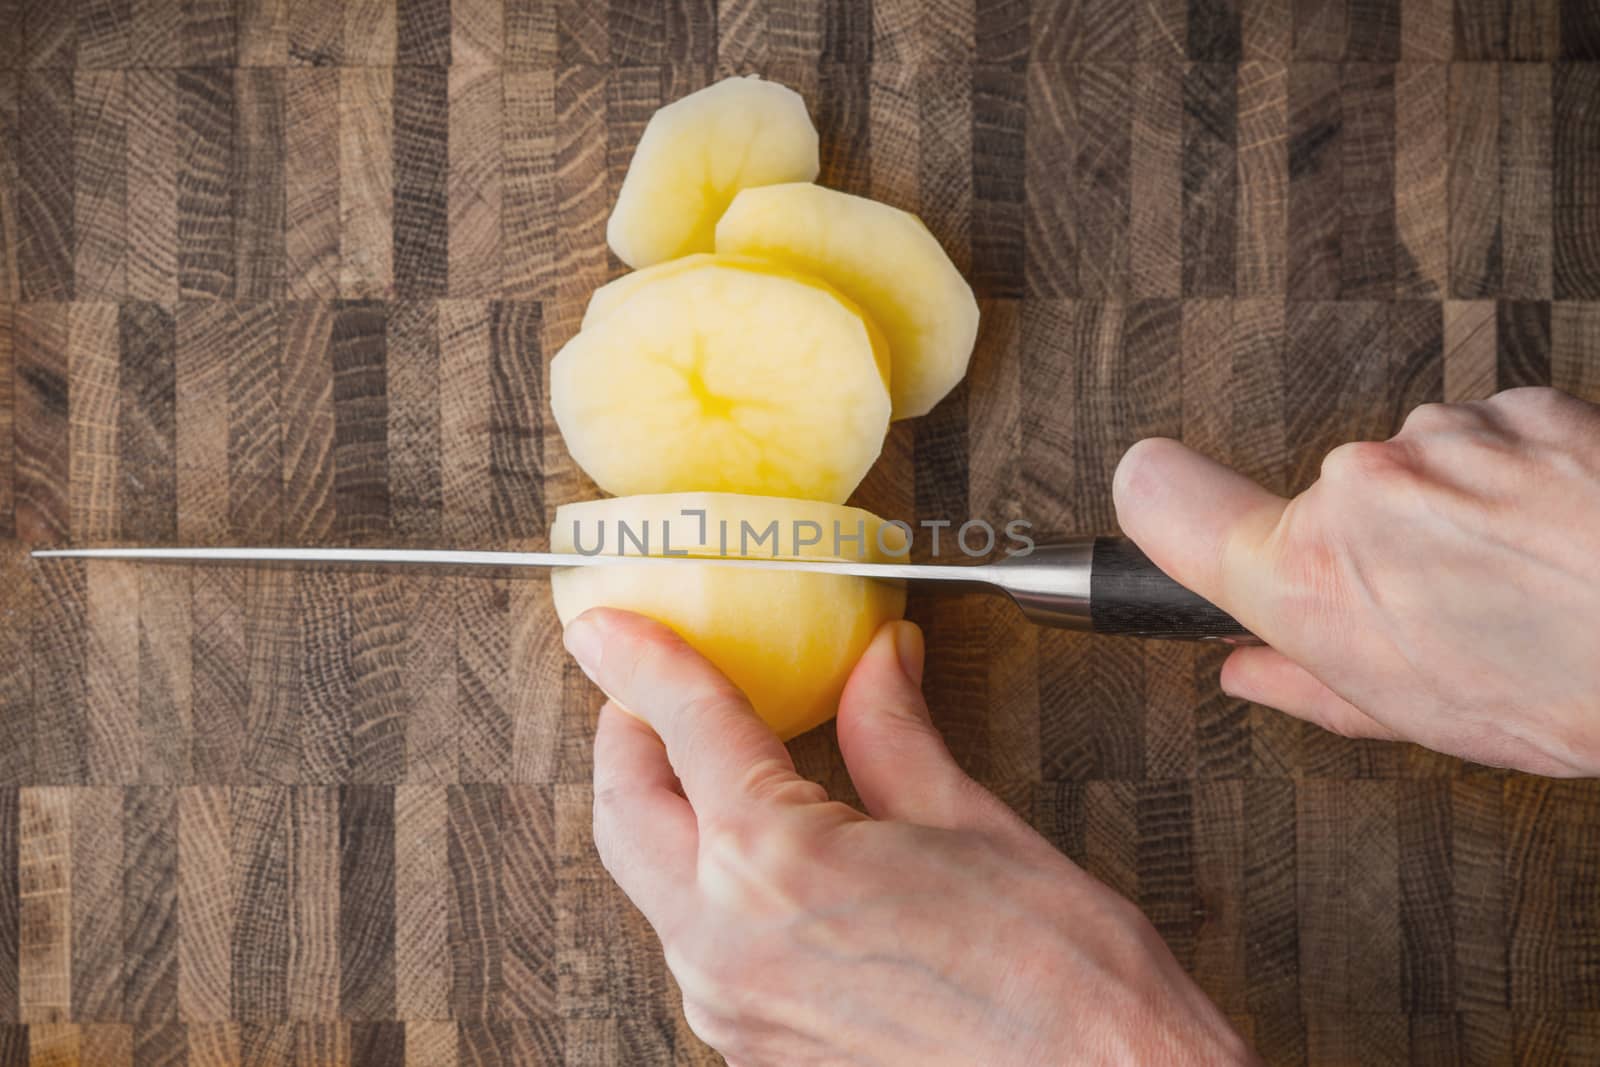 Cutting potatoes on the wooden board horizontal